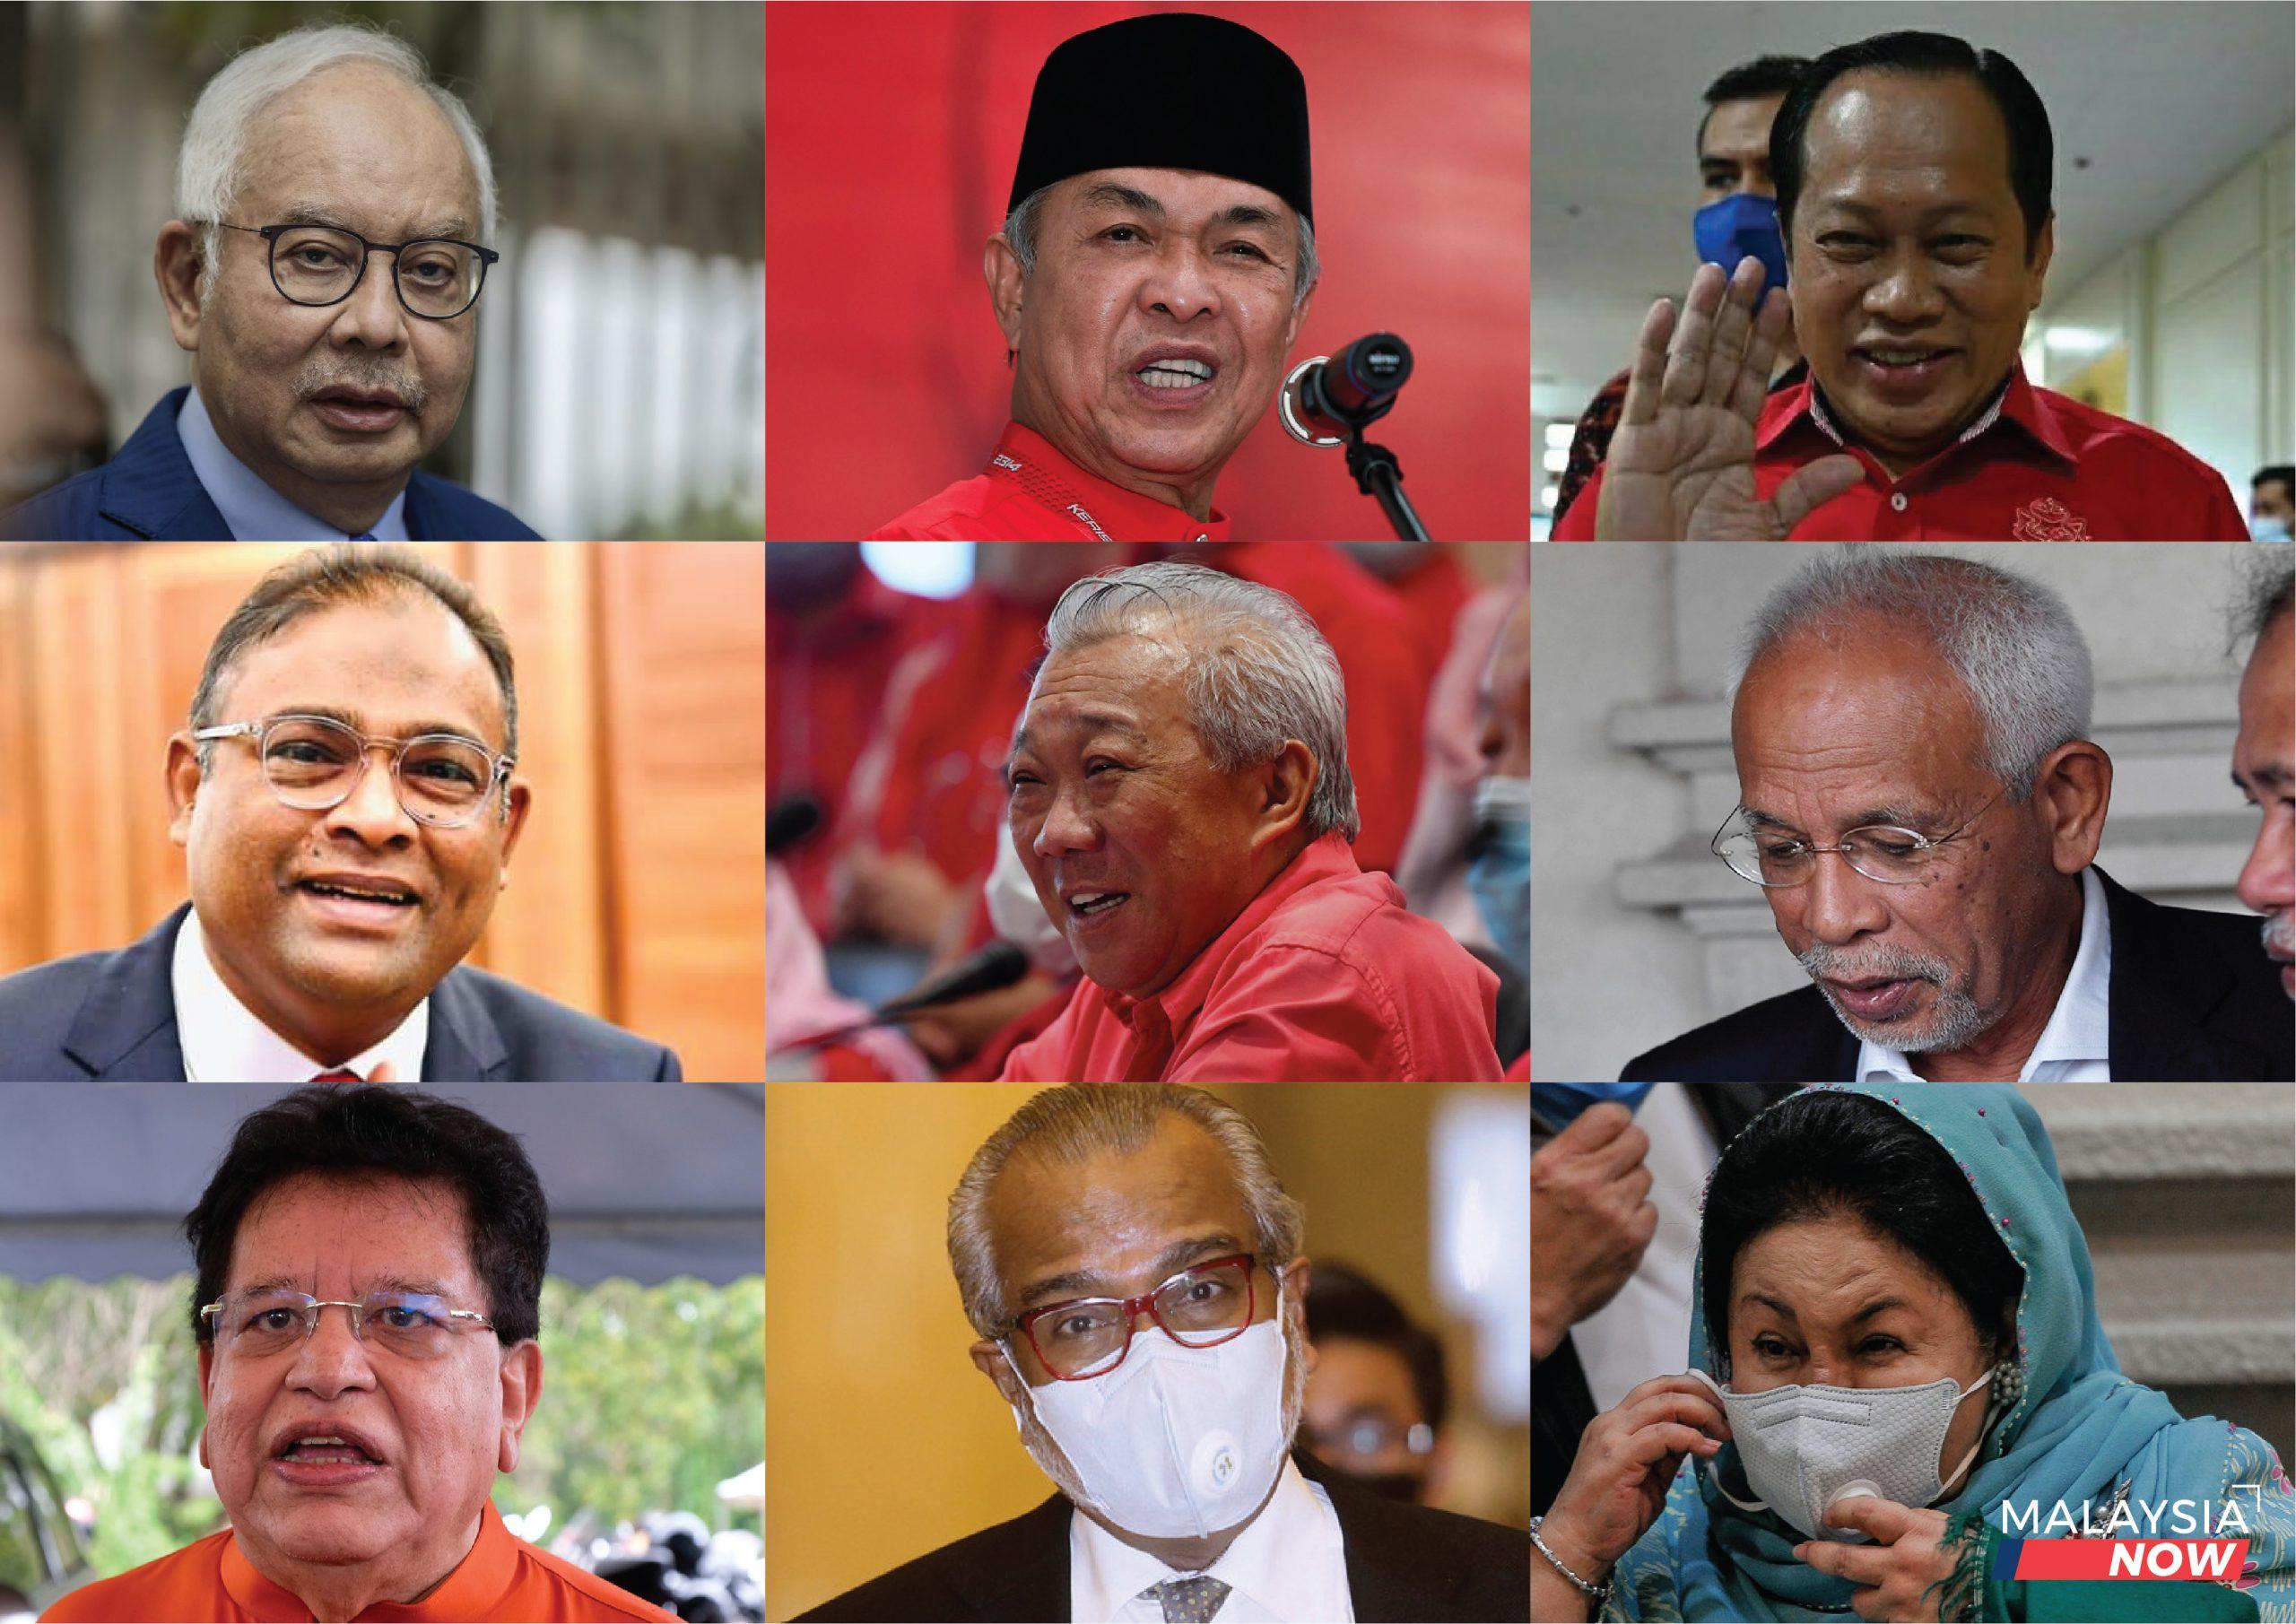 Nine individuals connected to Umno who are facing a string of corruption charges will be battling to avoid jail time and fines in the coming months. They are: (top row) Najib Razak, Ahmad Zahid Hamidi, Ahmad Maslan; (middle) Abdul Azeez Abdul Rahim, Bung Moktar Radin, Shahrir Samad; (bottom) Tengku Adnan Mansor, Muhammad Shafee Abdullah and Rosmah Mansor.